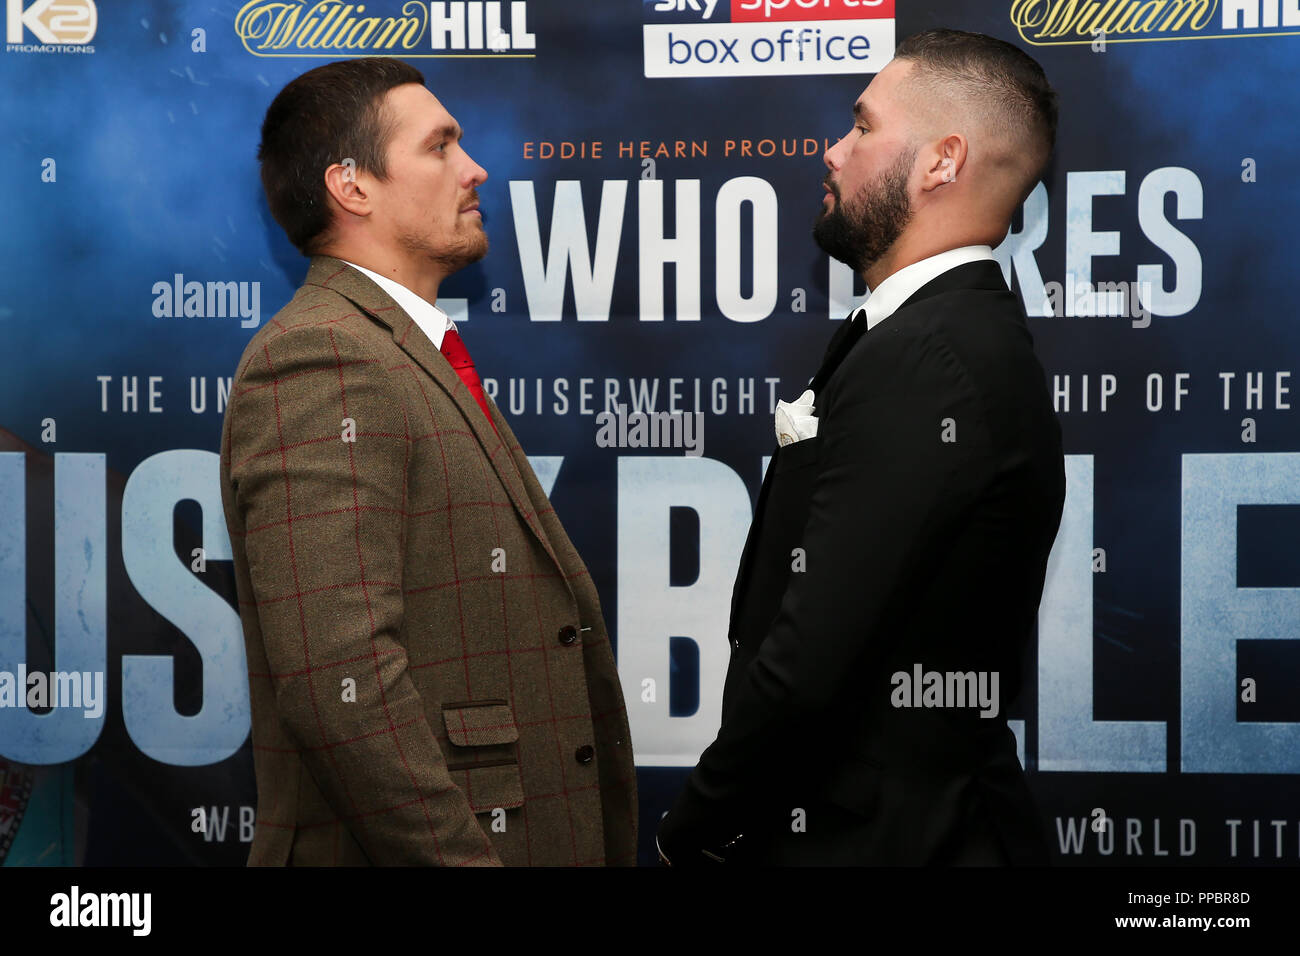 Manchester, UK. Monday 24th September 2018. Oleksandr Usyk and Tony Bellew face off during a Matchroom Boxing press conference in Manchester, UK. Credit: UK Sports Agency/Alamy Live News Stock Photo